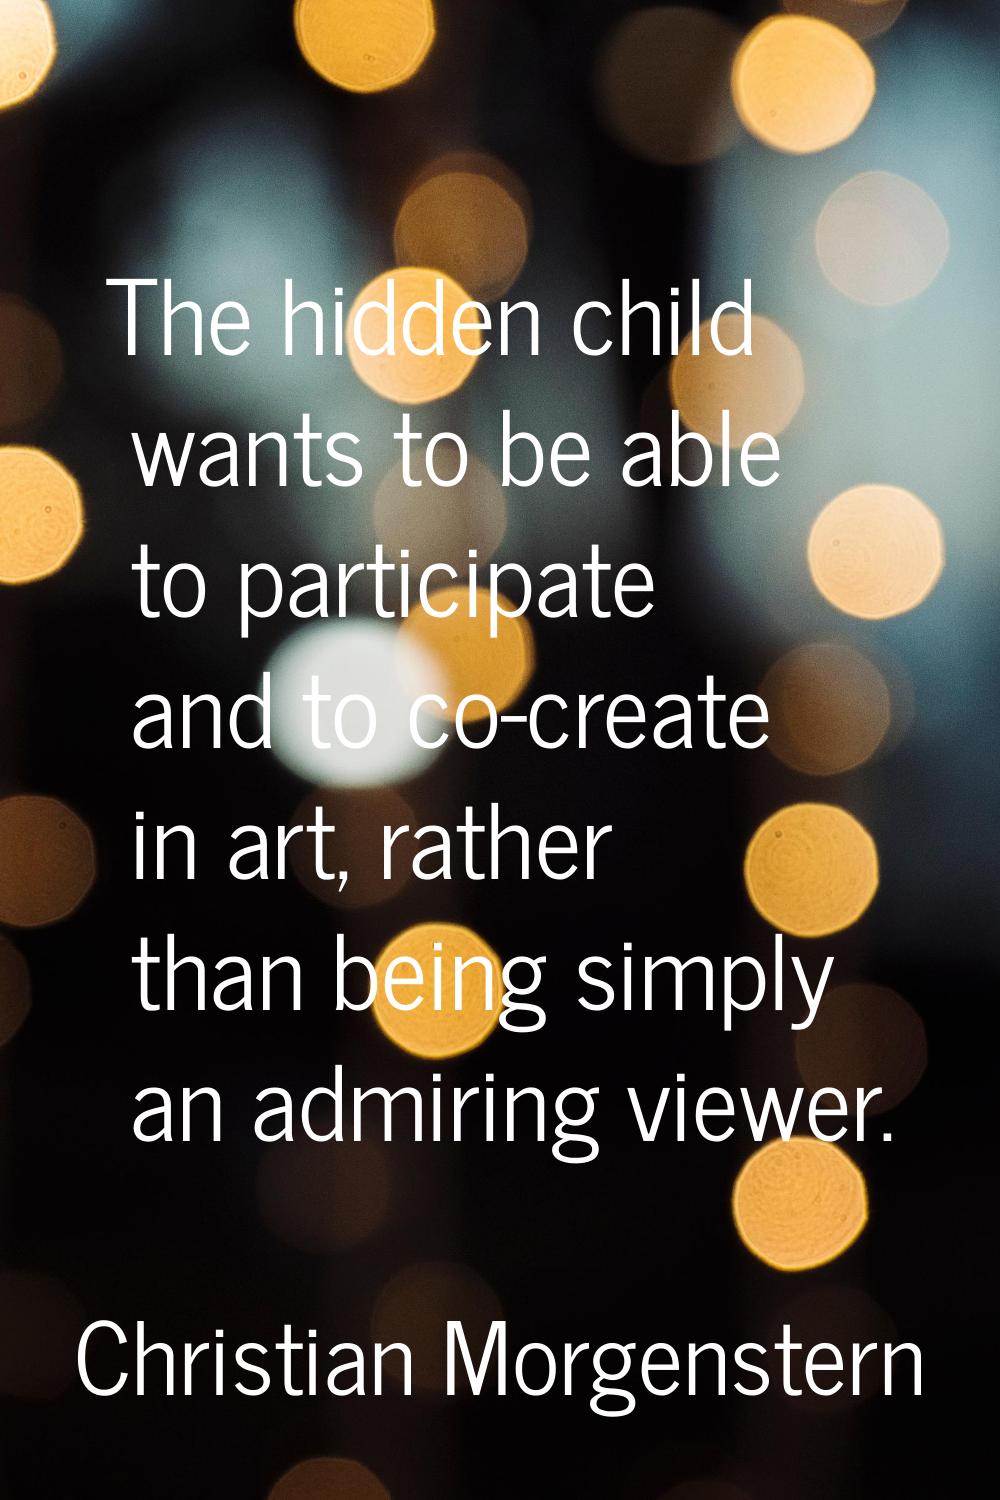 The hidden child wants to be able to participate and to co-create in art, rather than being simply 